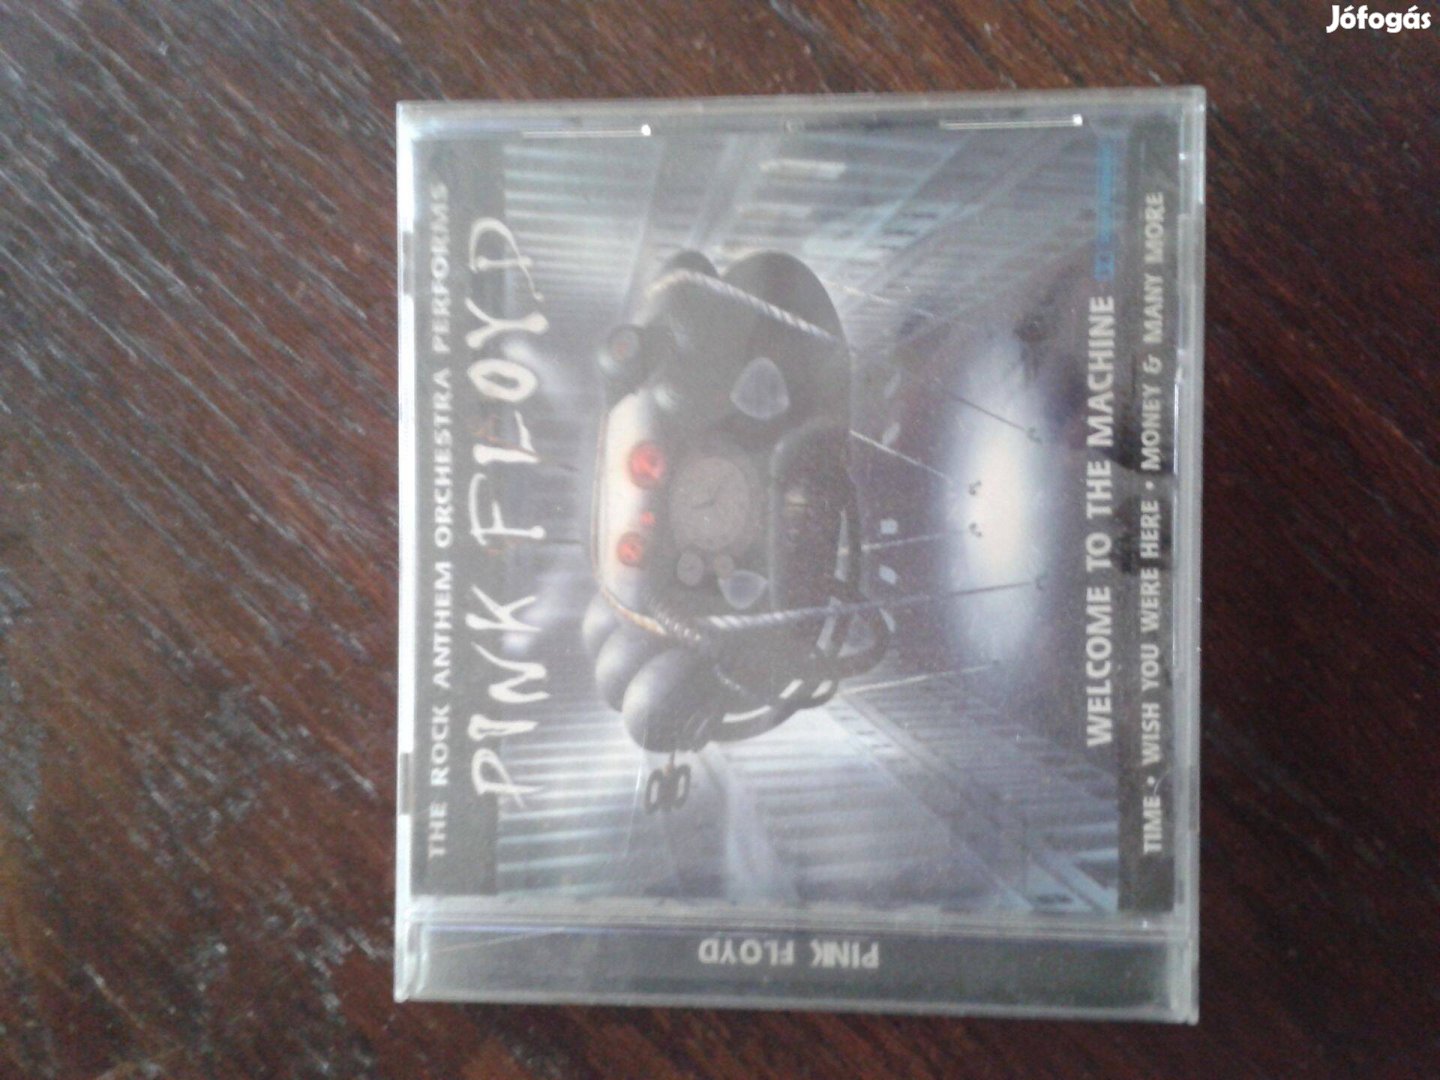 Pink Floyd-Welcome to the machine CD